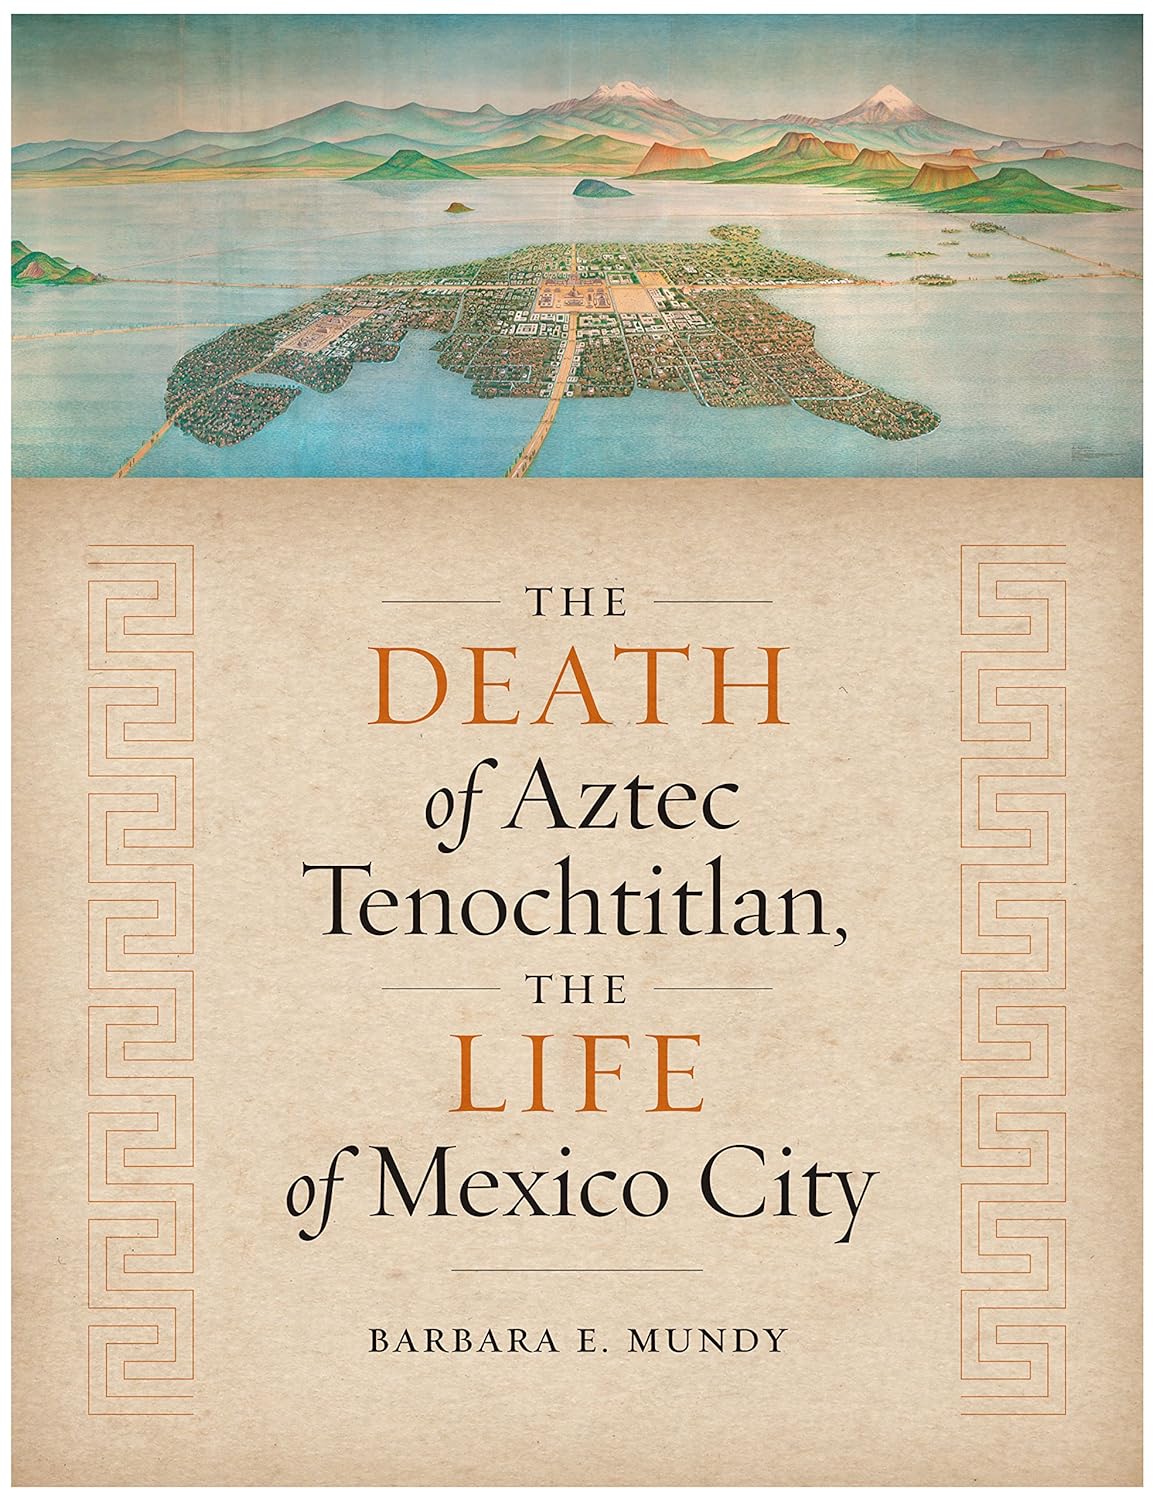 books about the aztecs12